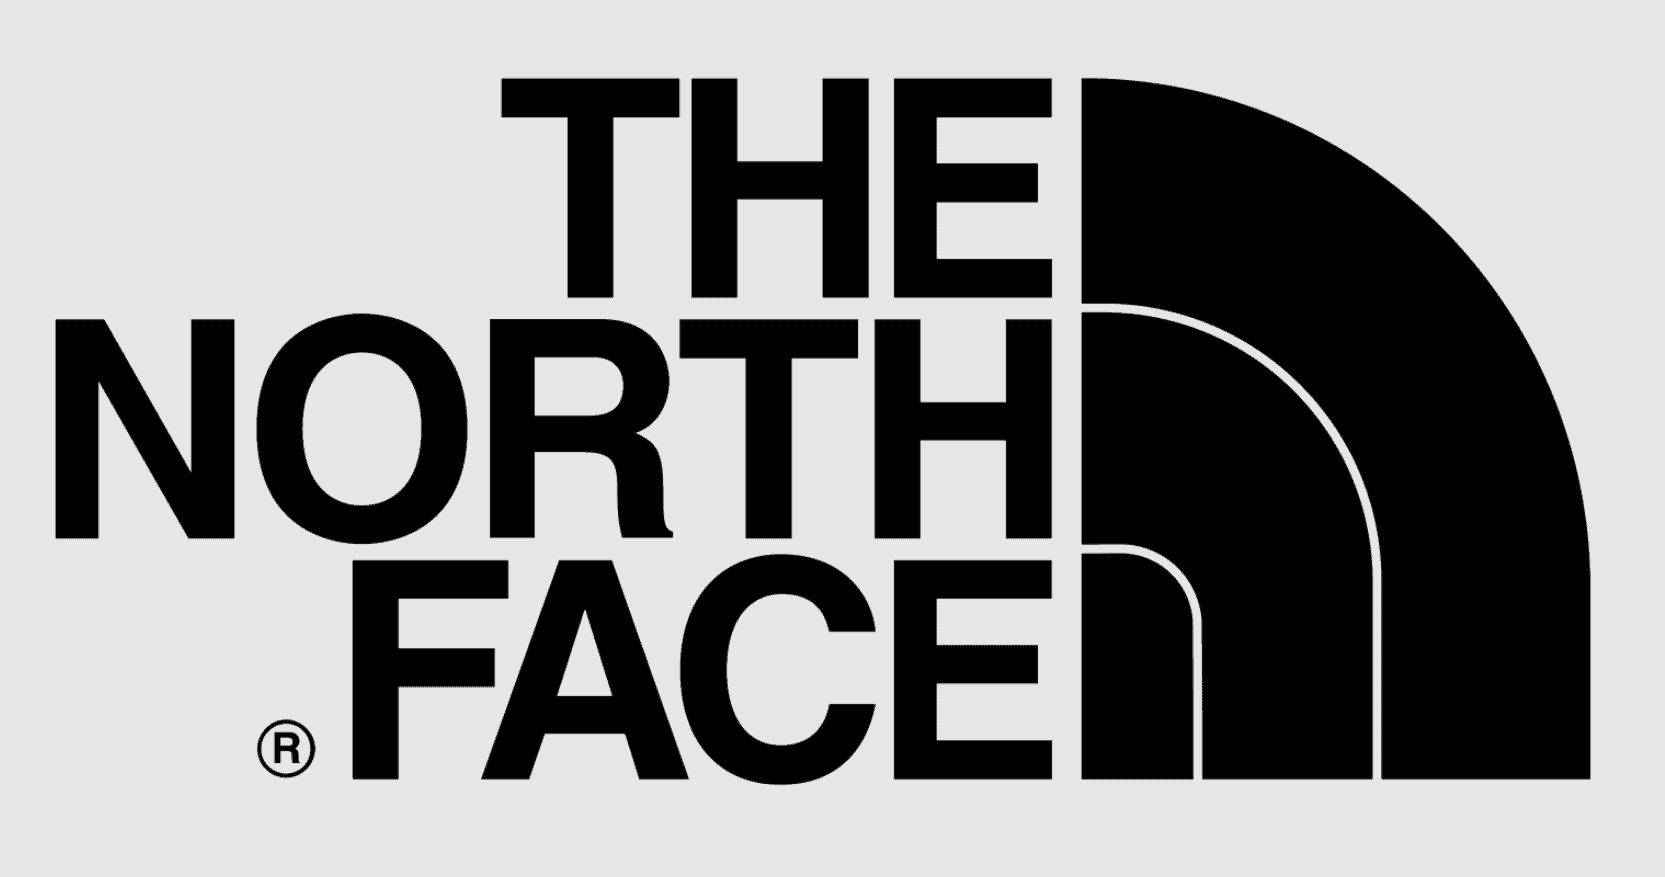 Receive 10% Off on your first purchase at The North Face.